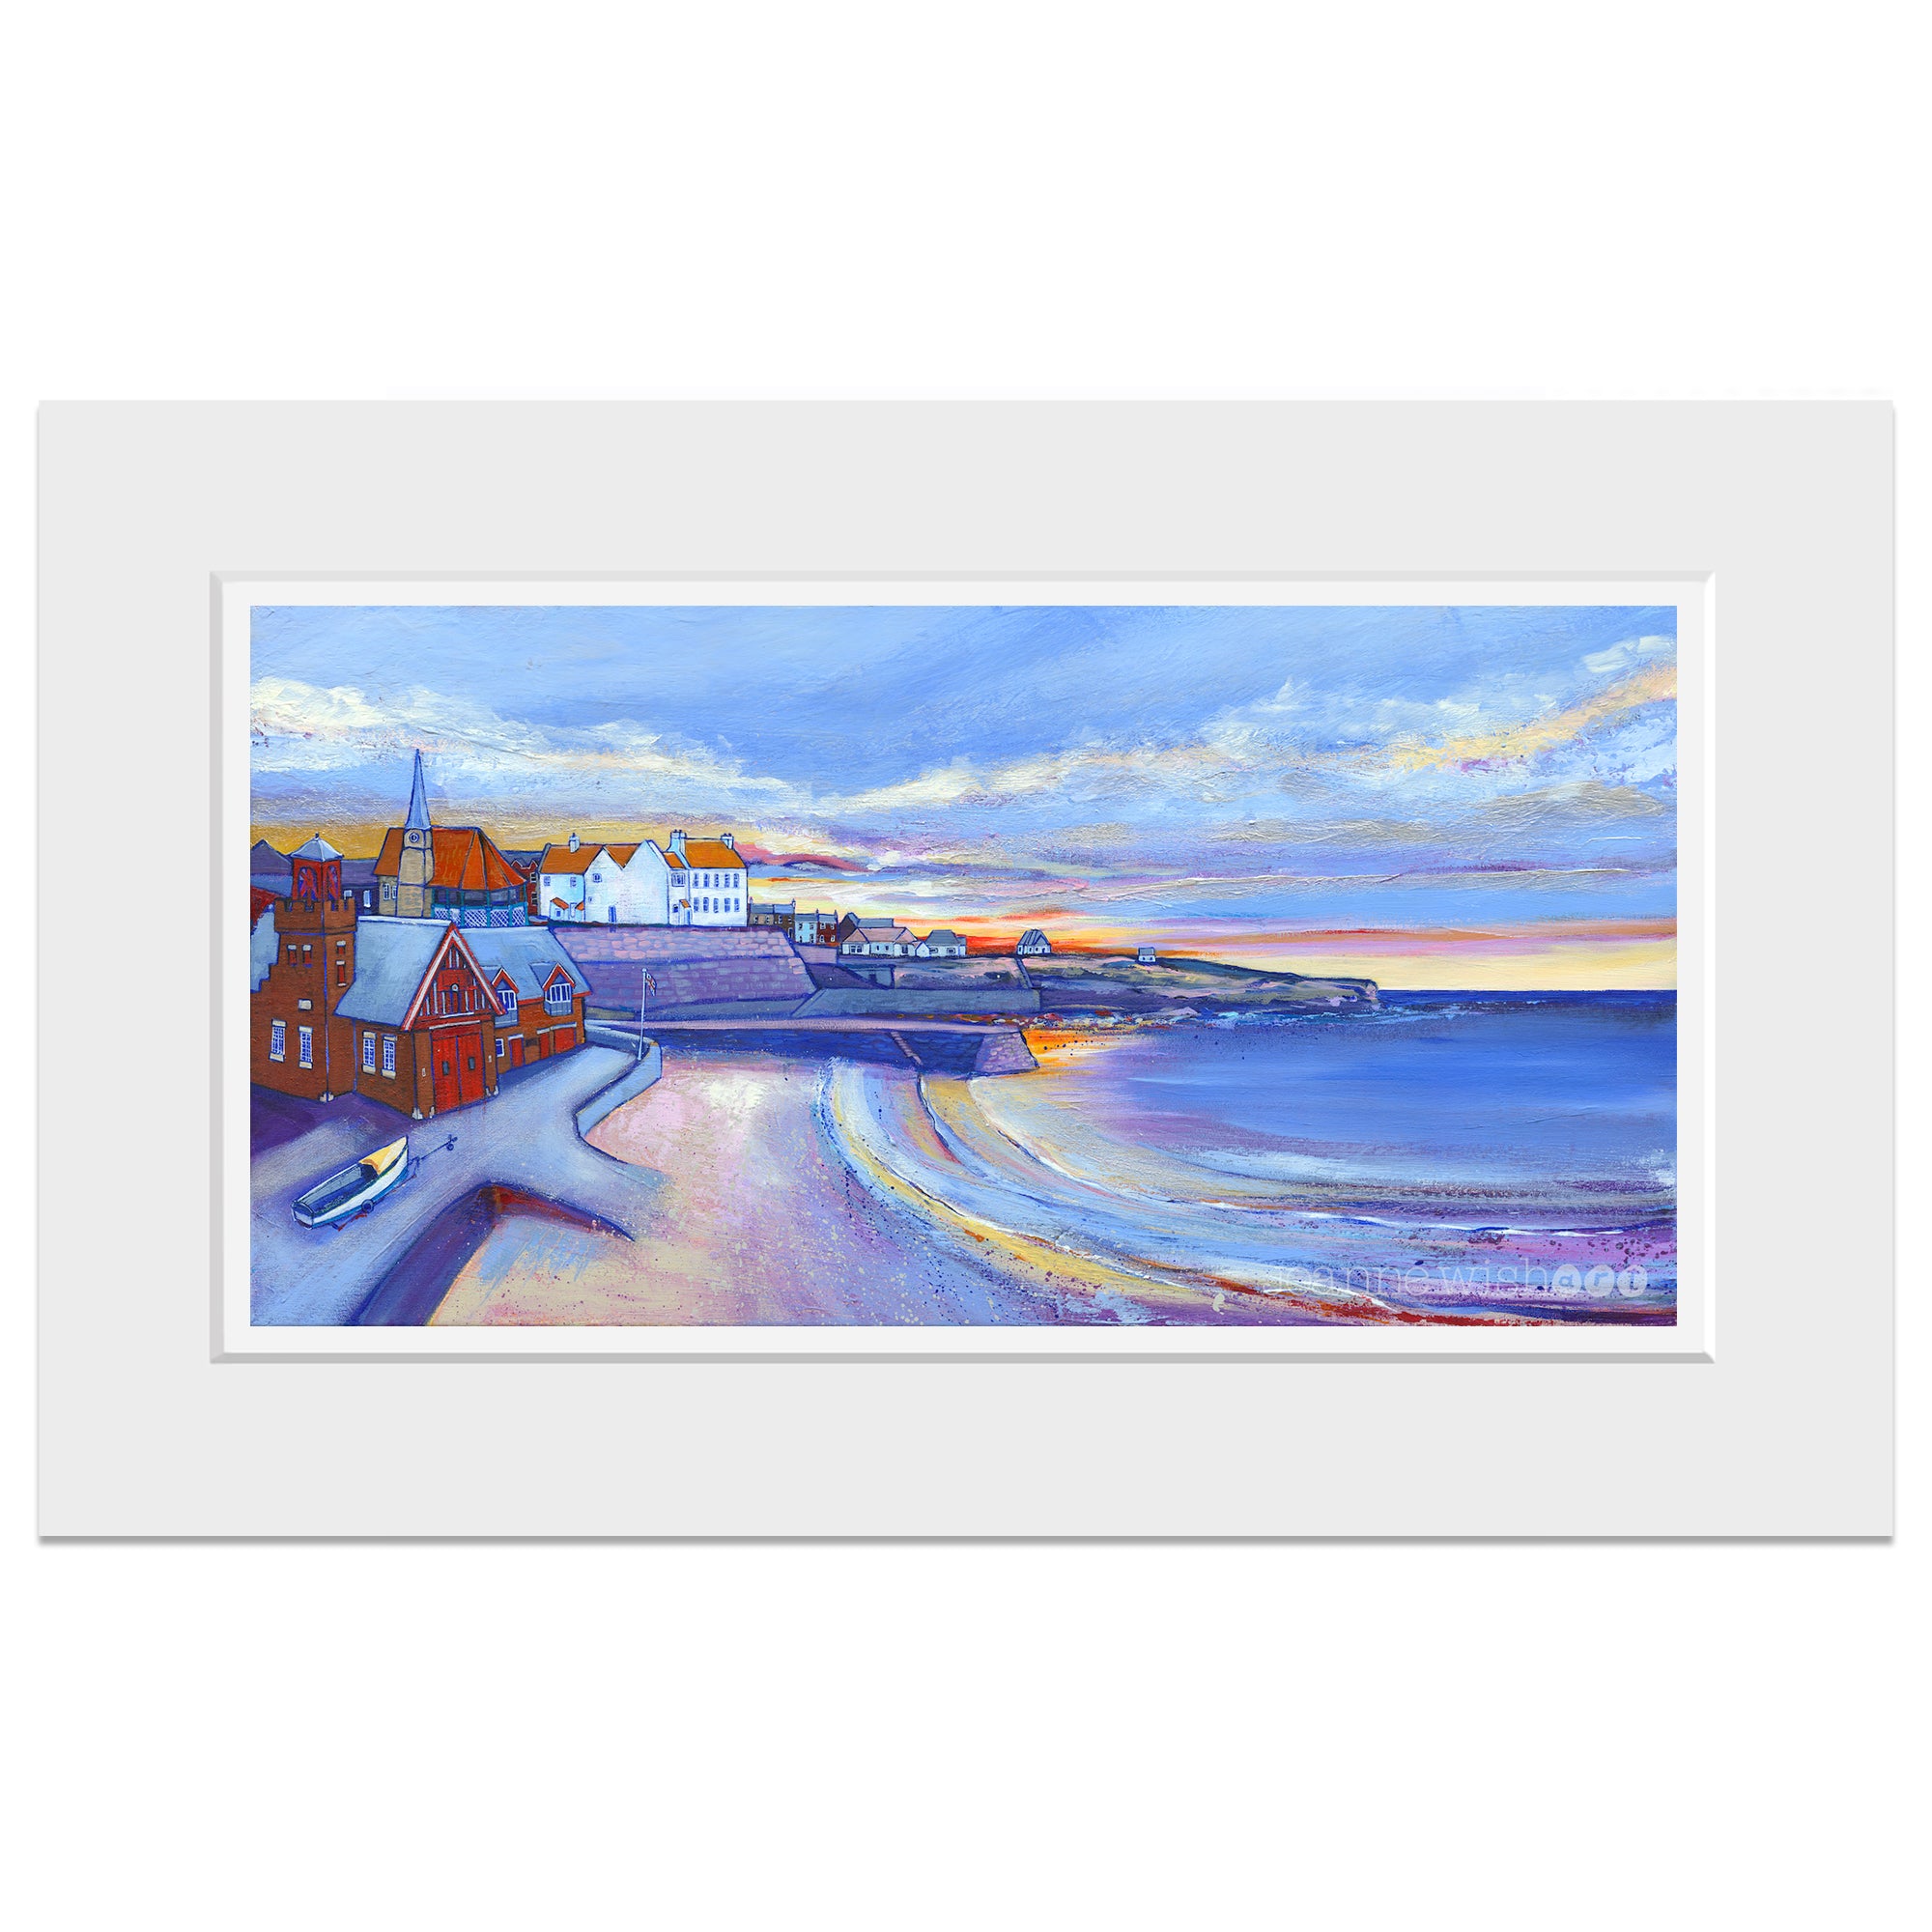 A mounted print of Cullercoats with a dramatic winter sky.